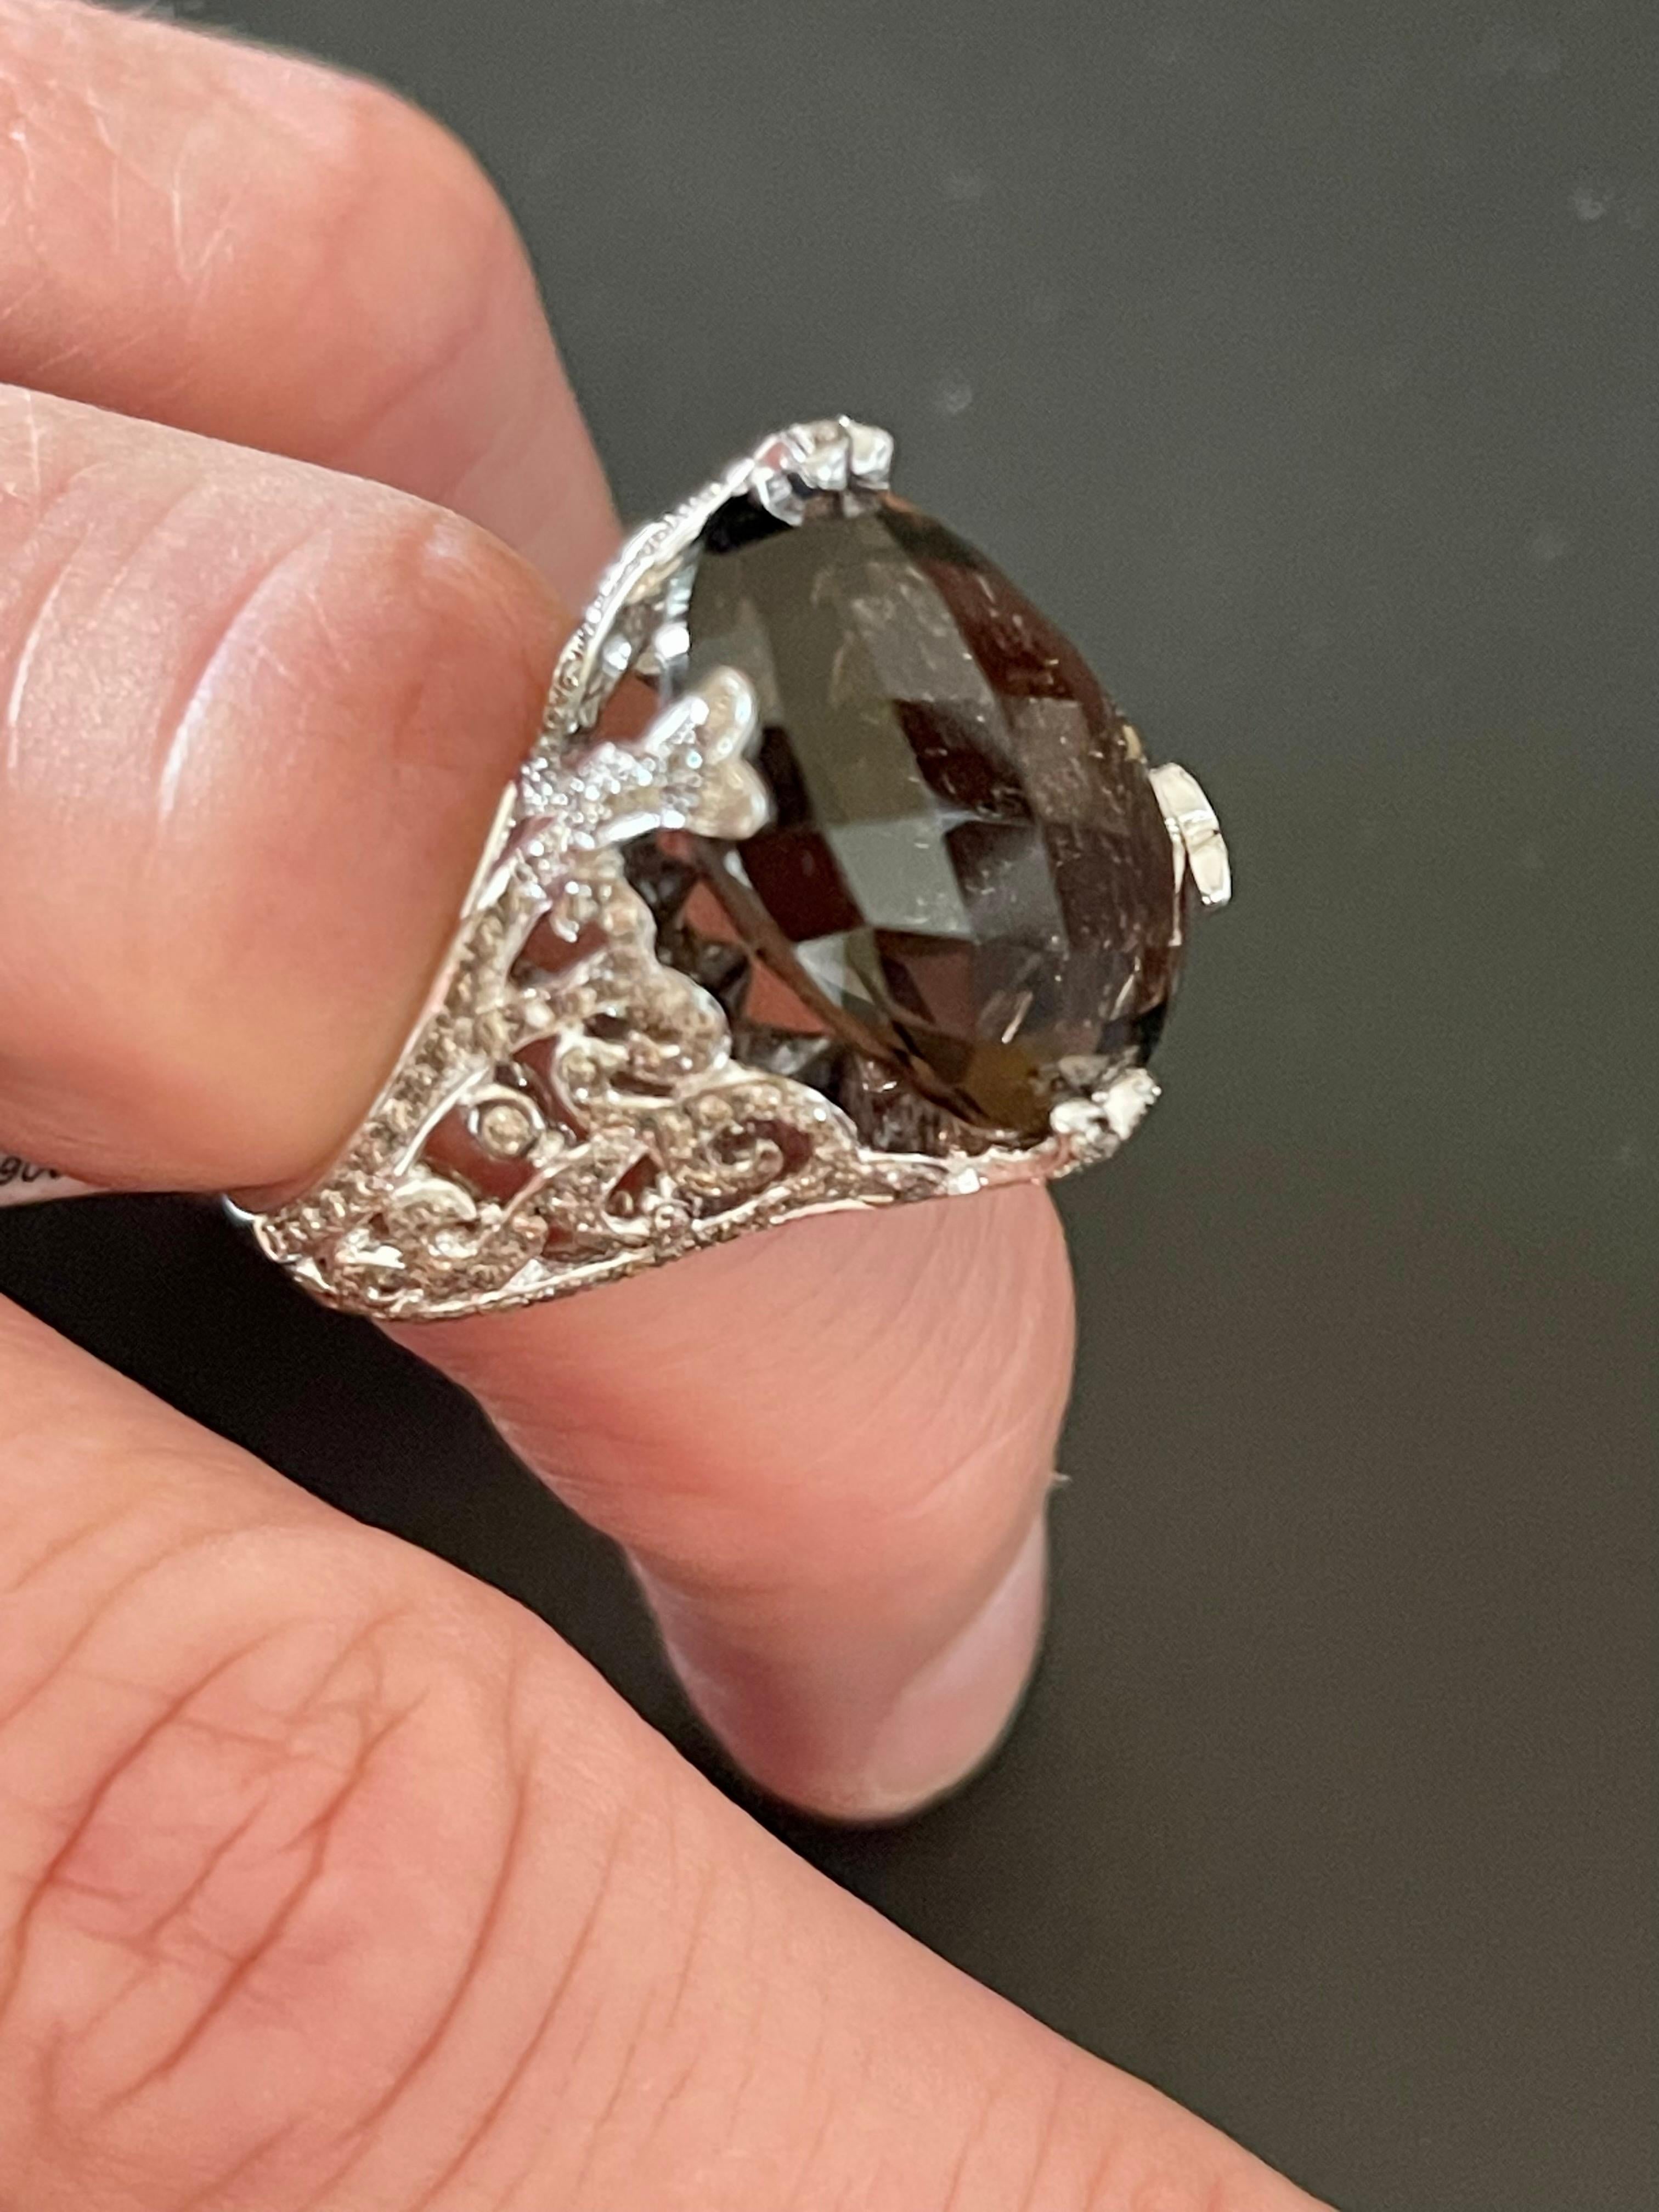 18 K white Gold Statement Ring featuring a fancy cut oval Smoky Quartz weighing 17.92 ct. The ring shoulders show beautiful ornaments reminiscing timeless byzantine craftmanship, set with 198 Champagne colored Diamonds weighing0.85 ct.  
This ring